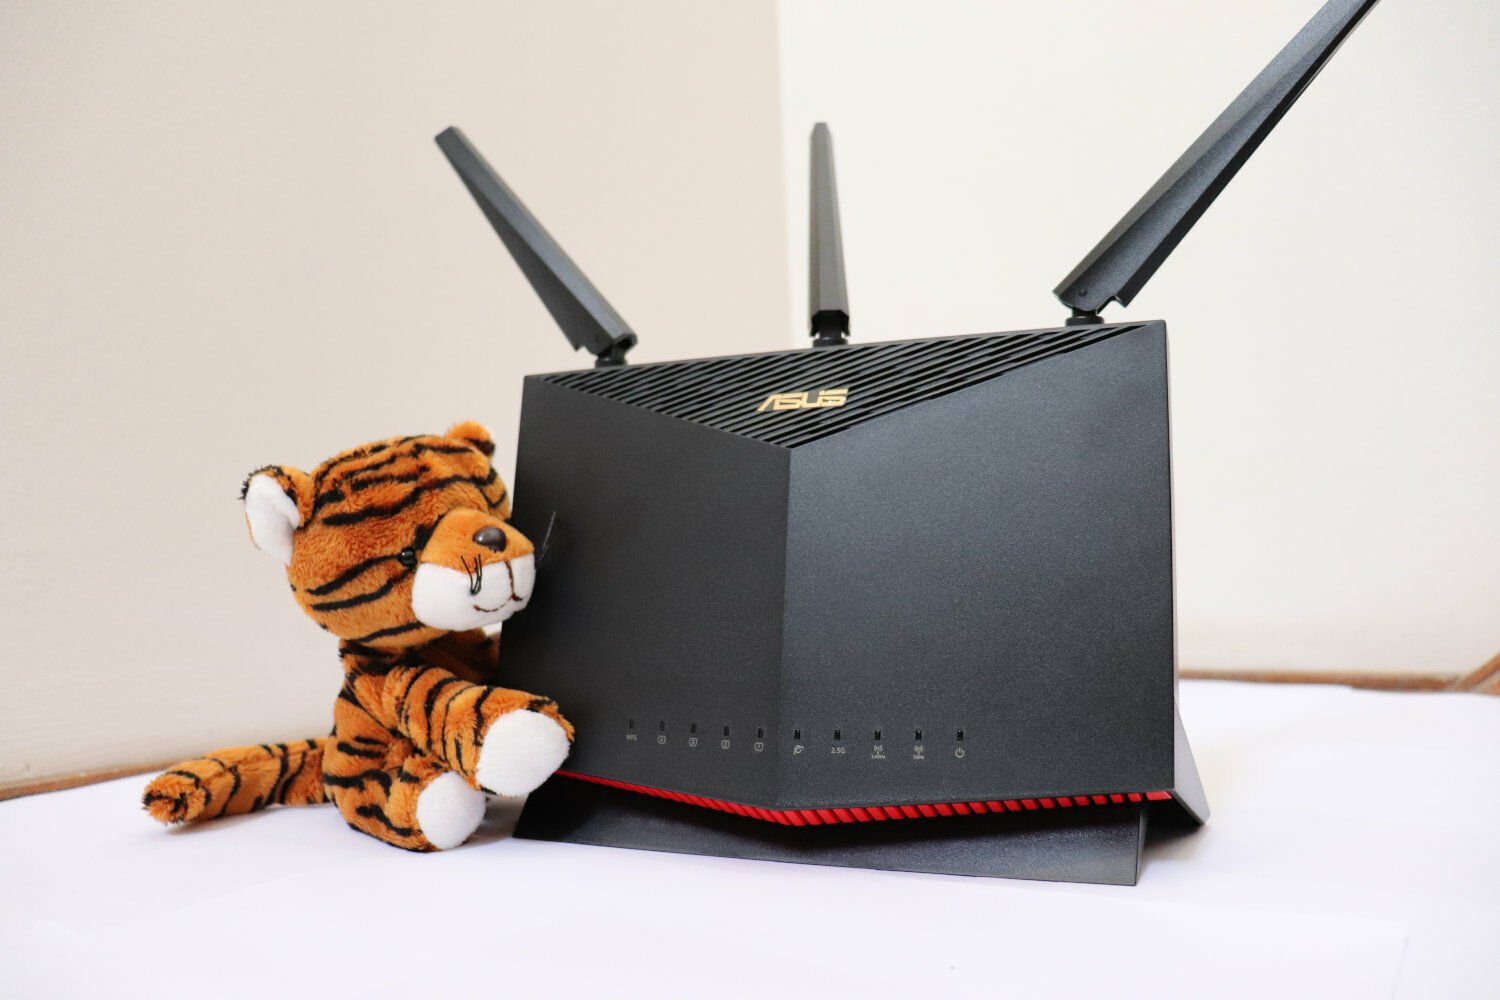 ASUS RT-AX86U - Best Gaming Router Review